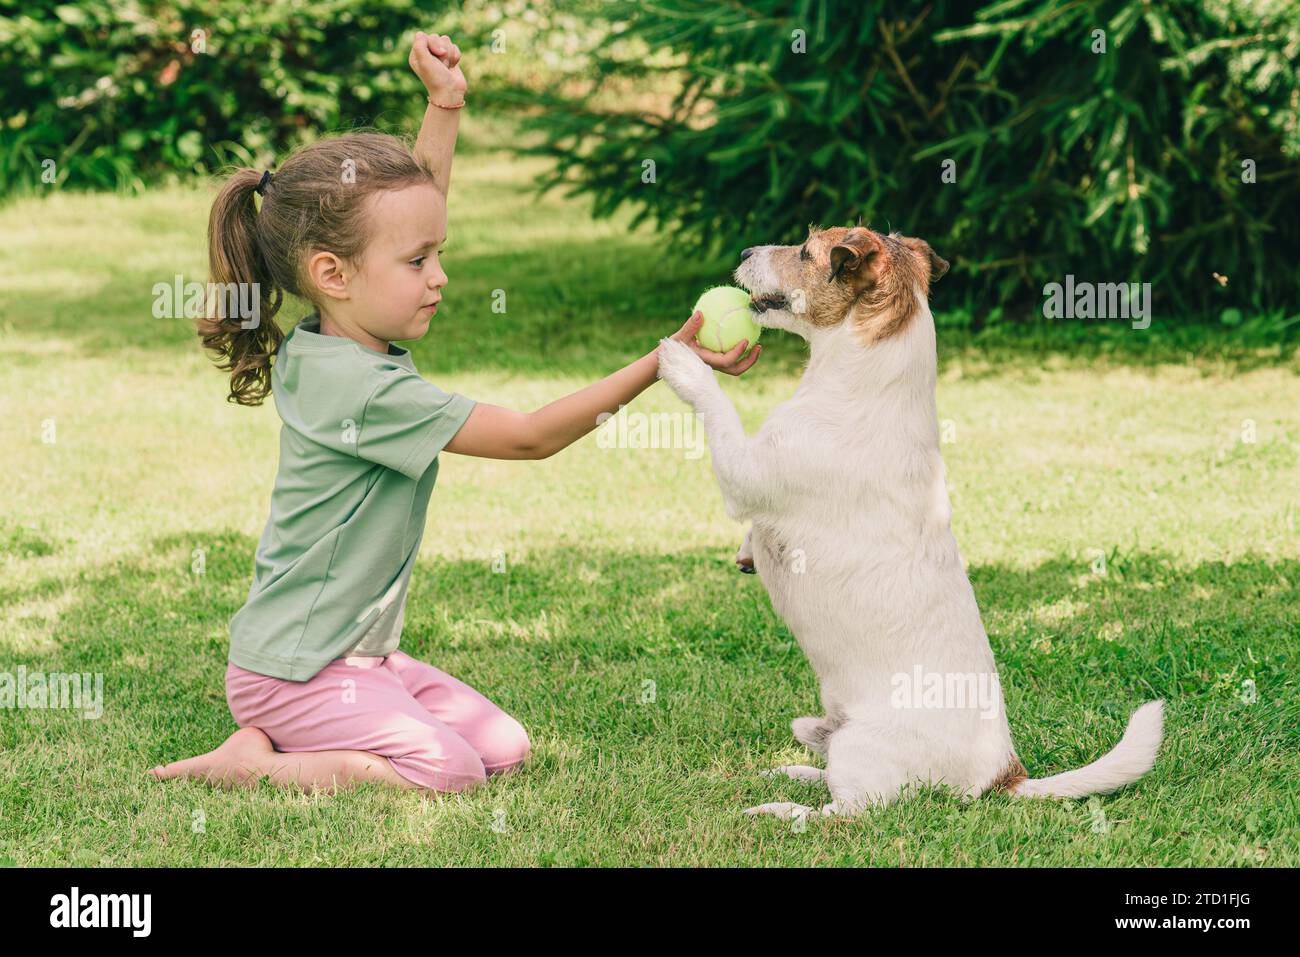 How to train a dog without treats and what non food reward to use. Girl training a dog rewards her pet with a ball toy. Stock Photo